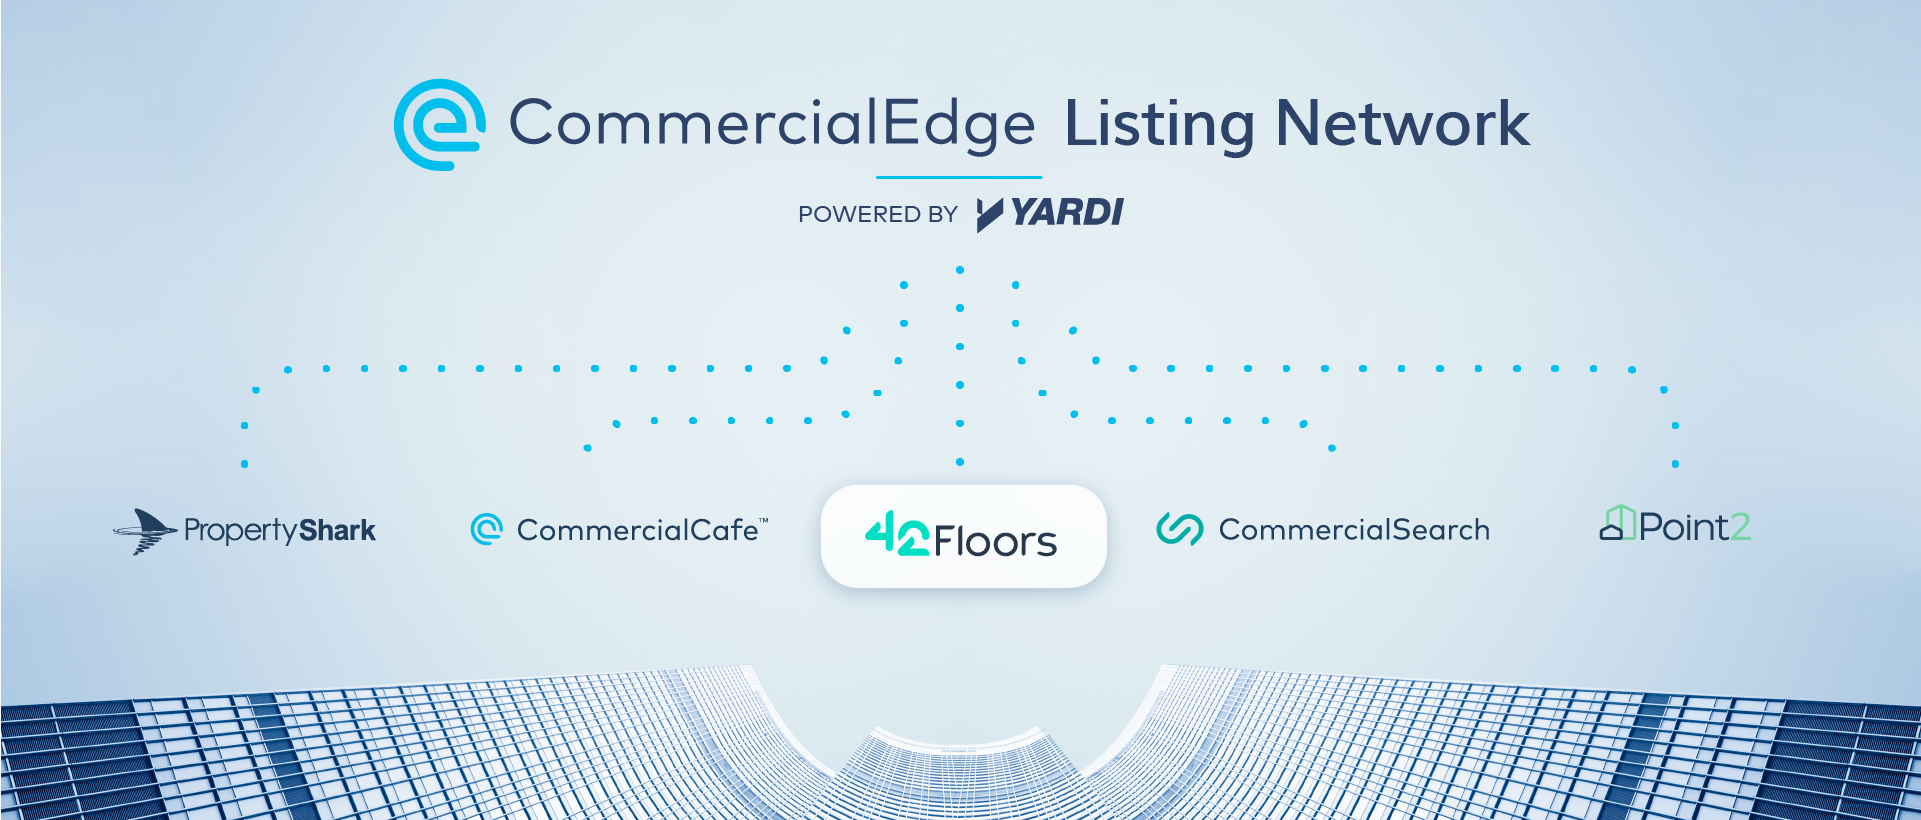 CRE Marketplace 42Floors.com Joins the CommercialEdge Listing Network